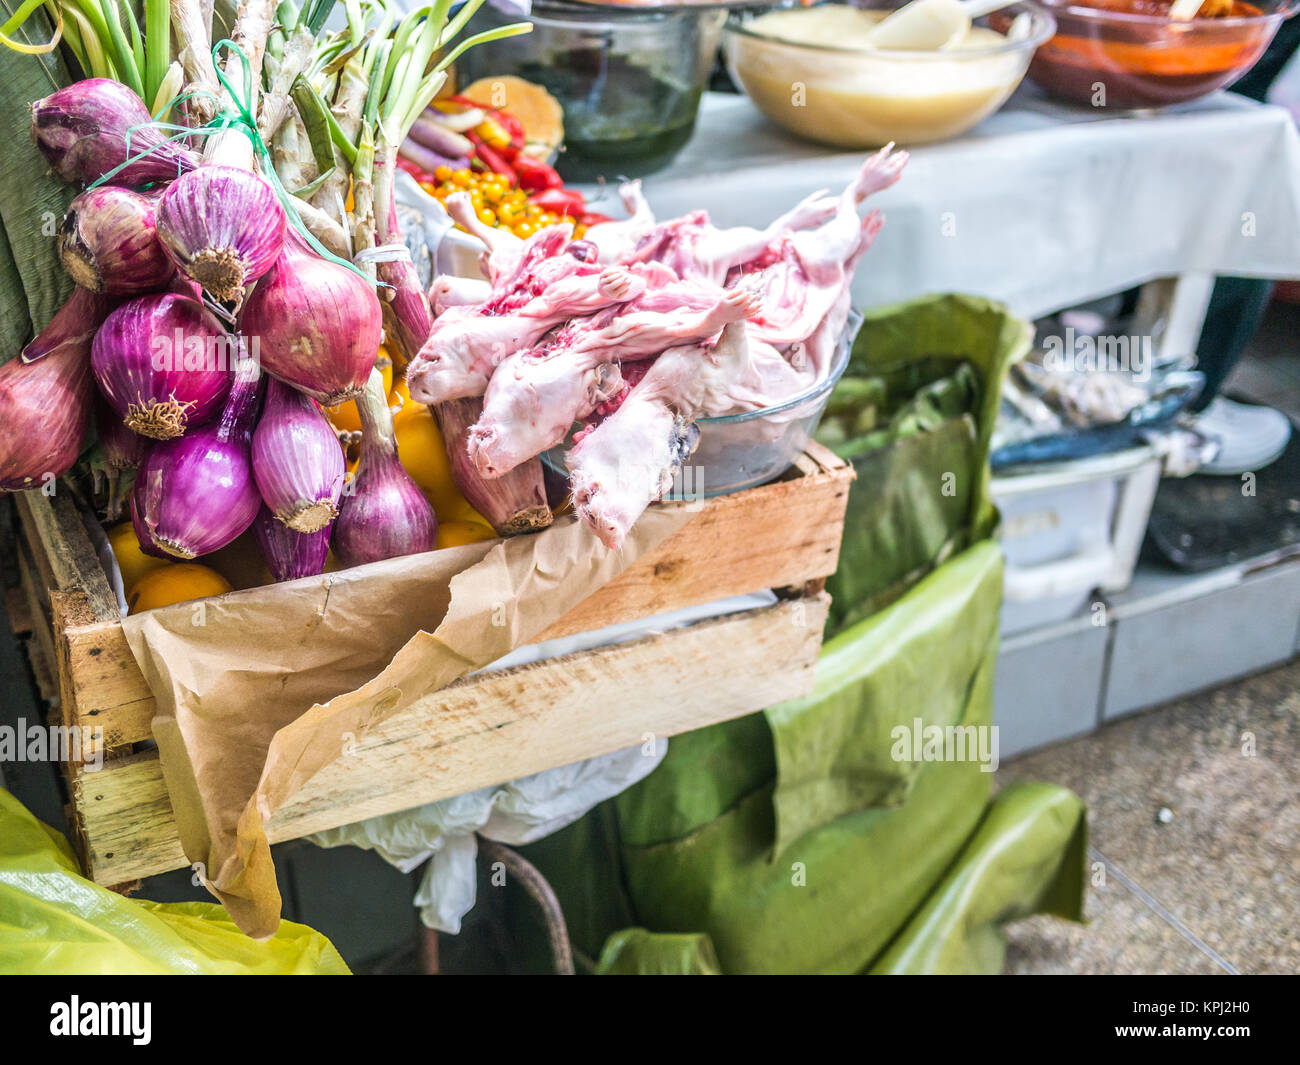 A little store in Mercado de Surquillo market selling the typical peruvian Cuy Stock Photo